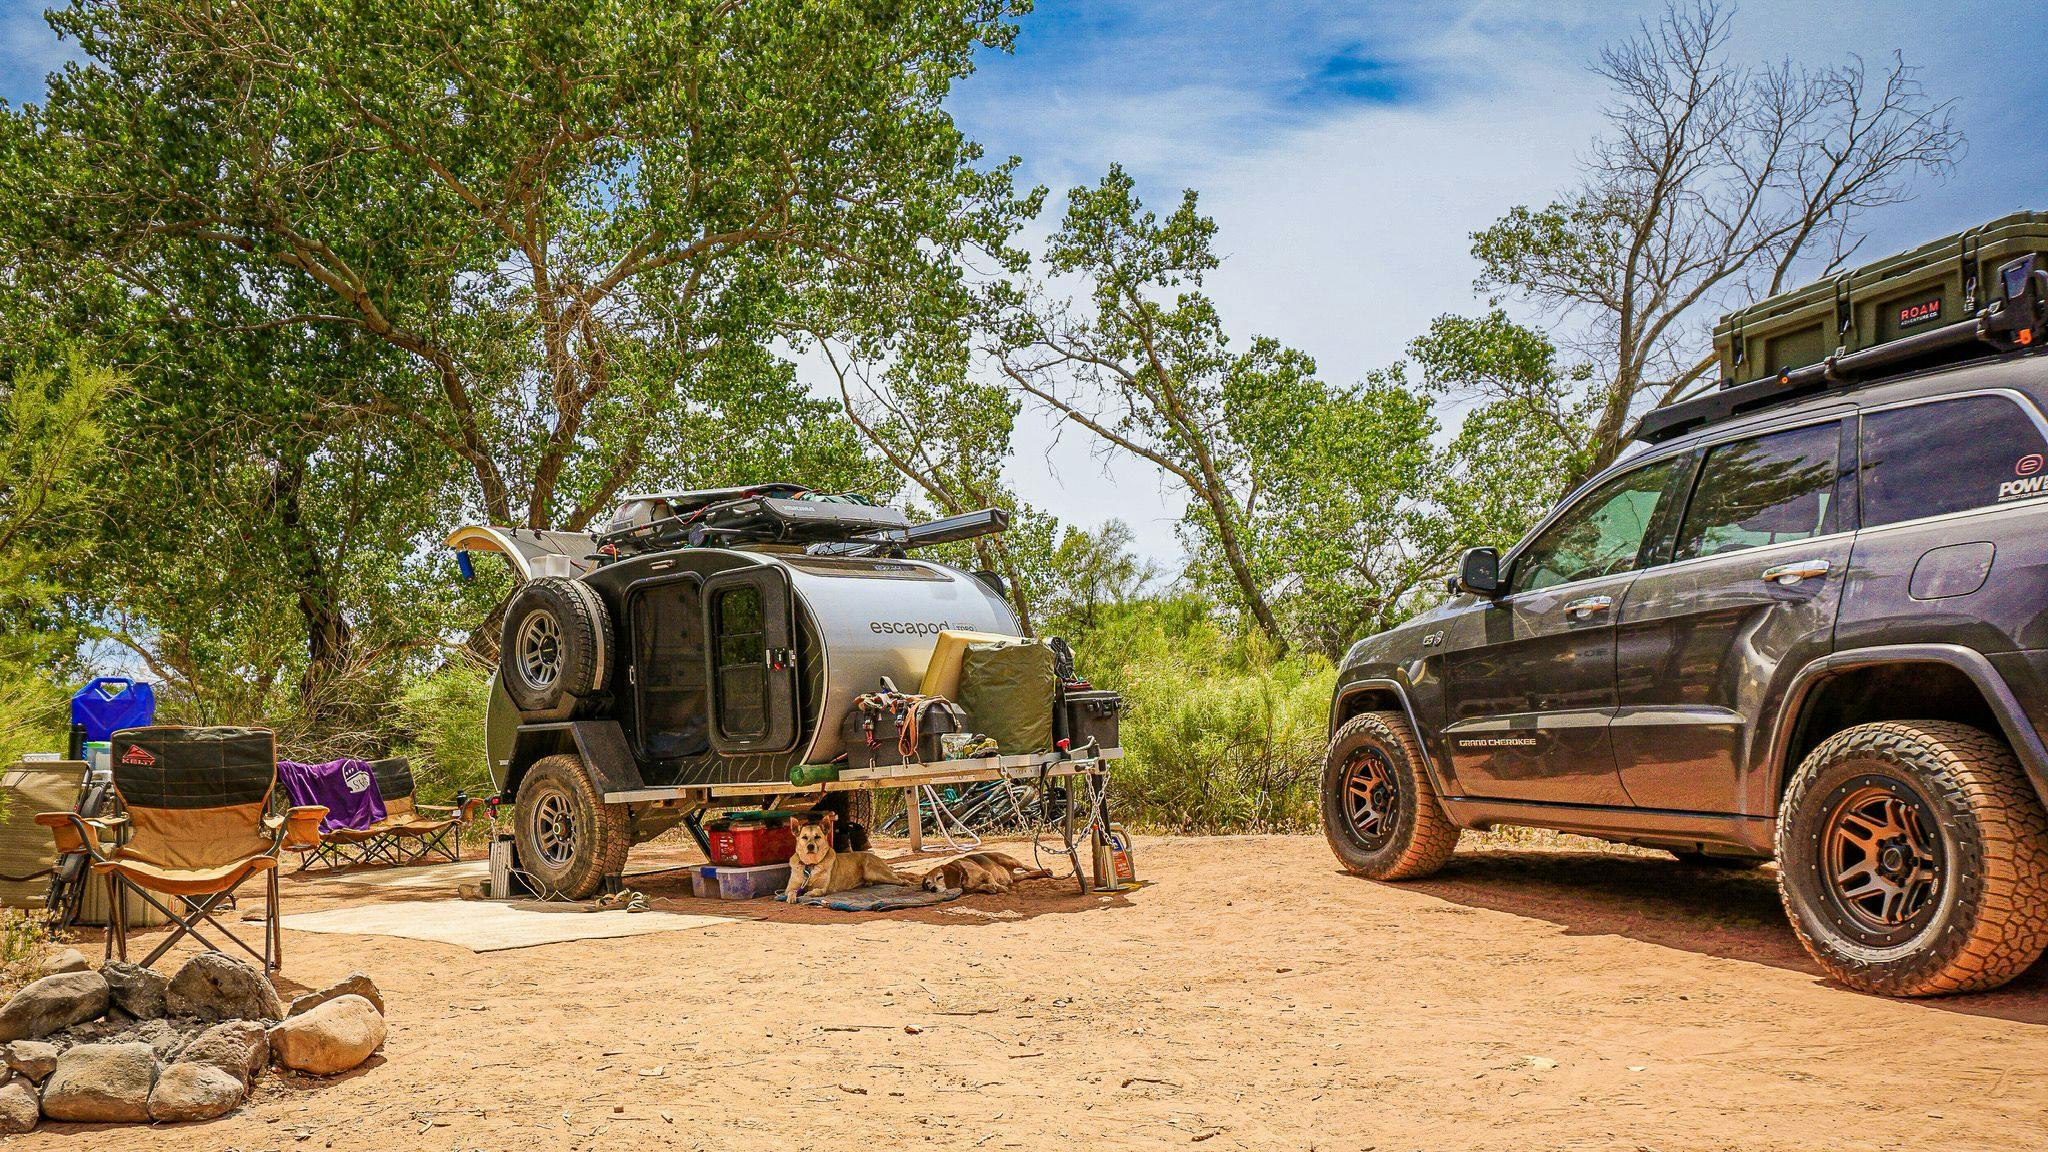 A green and black teardrop trailer parked in a remote camping spot alongside a JEEP.